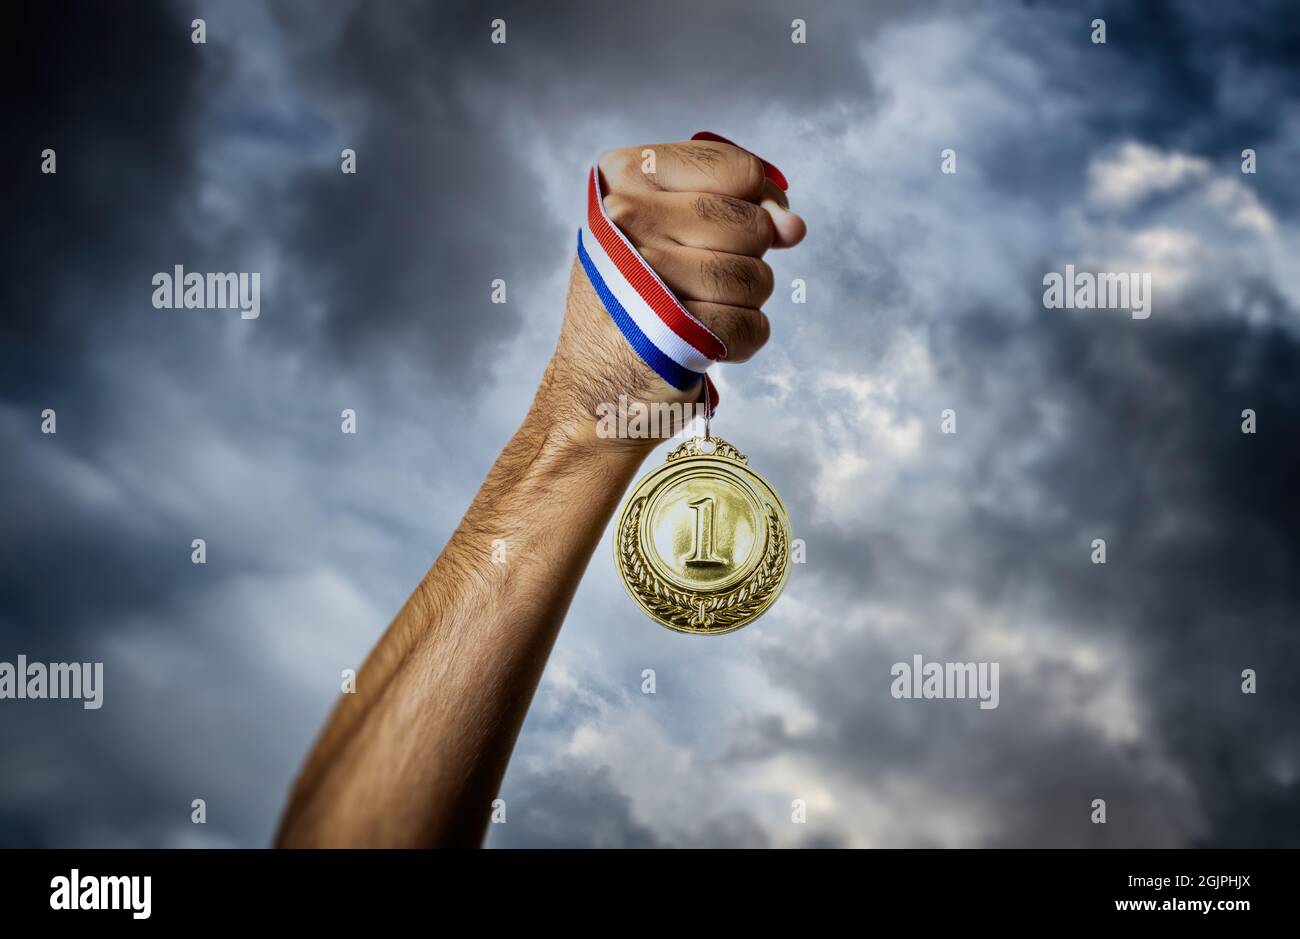 Medal for first place in the athlete hand against a dramatic sky. Winner gold award. Sport champion victory and success concept Stock Photo